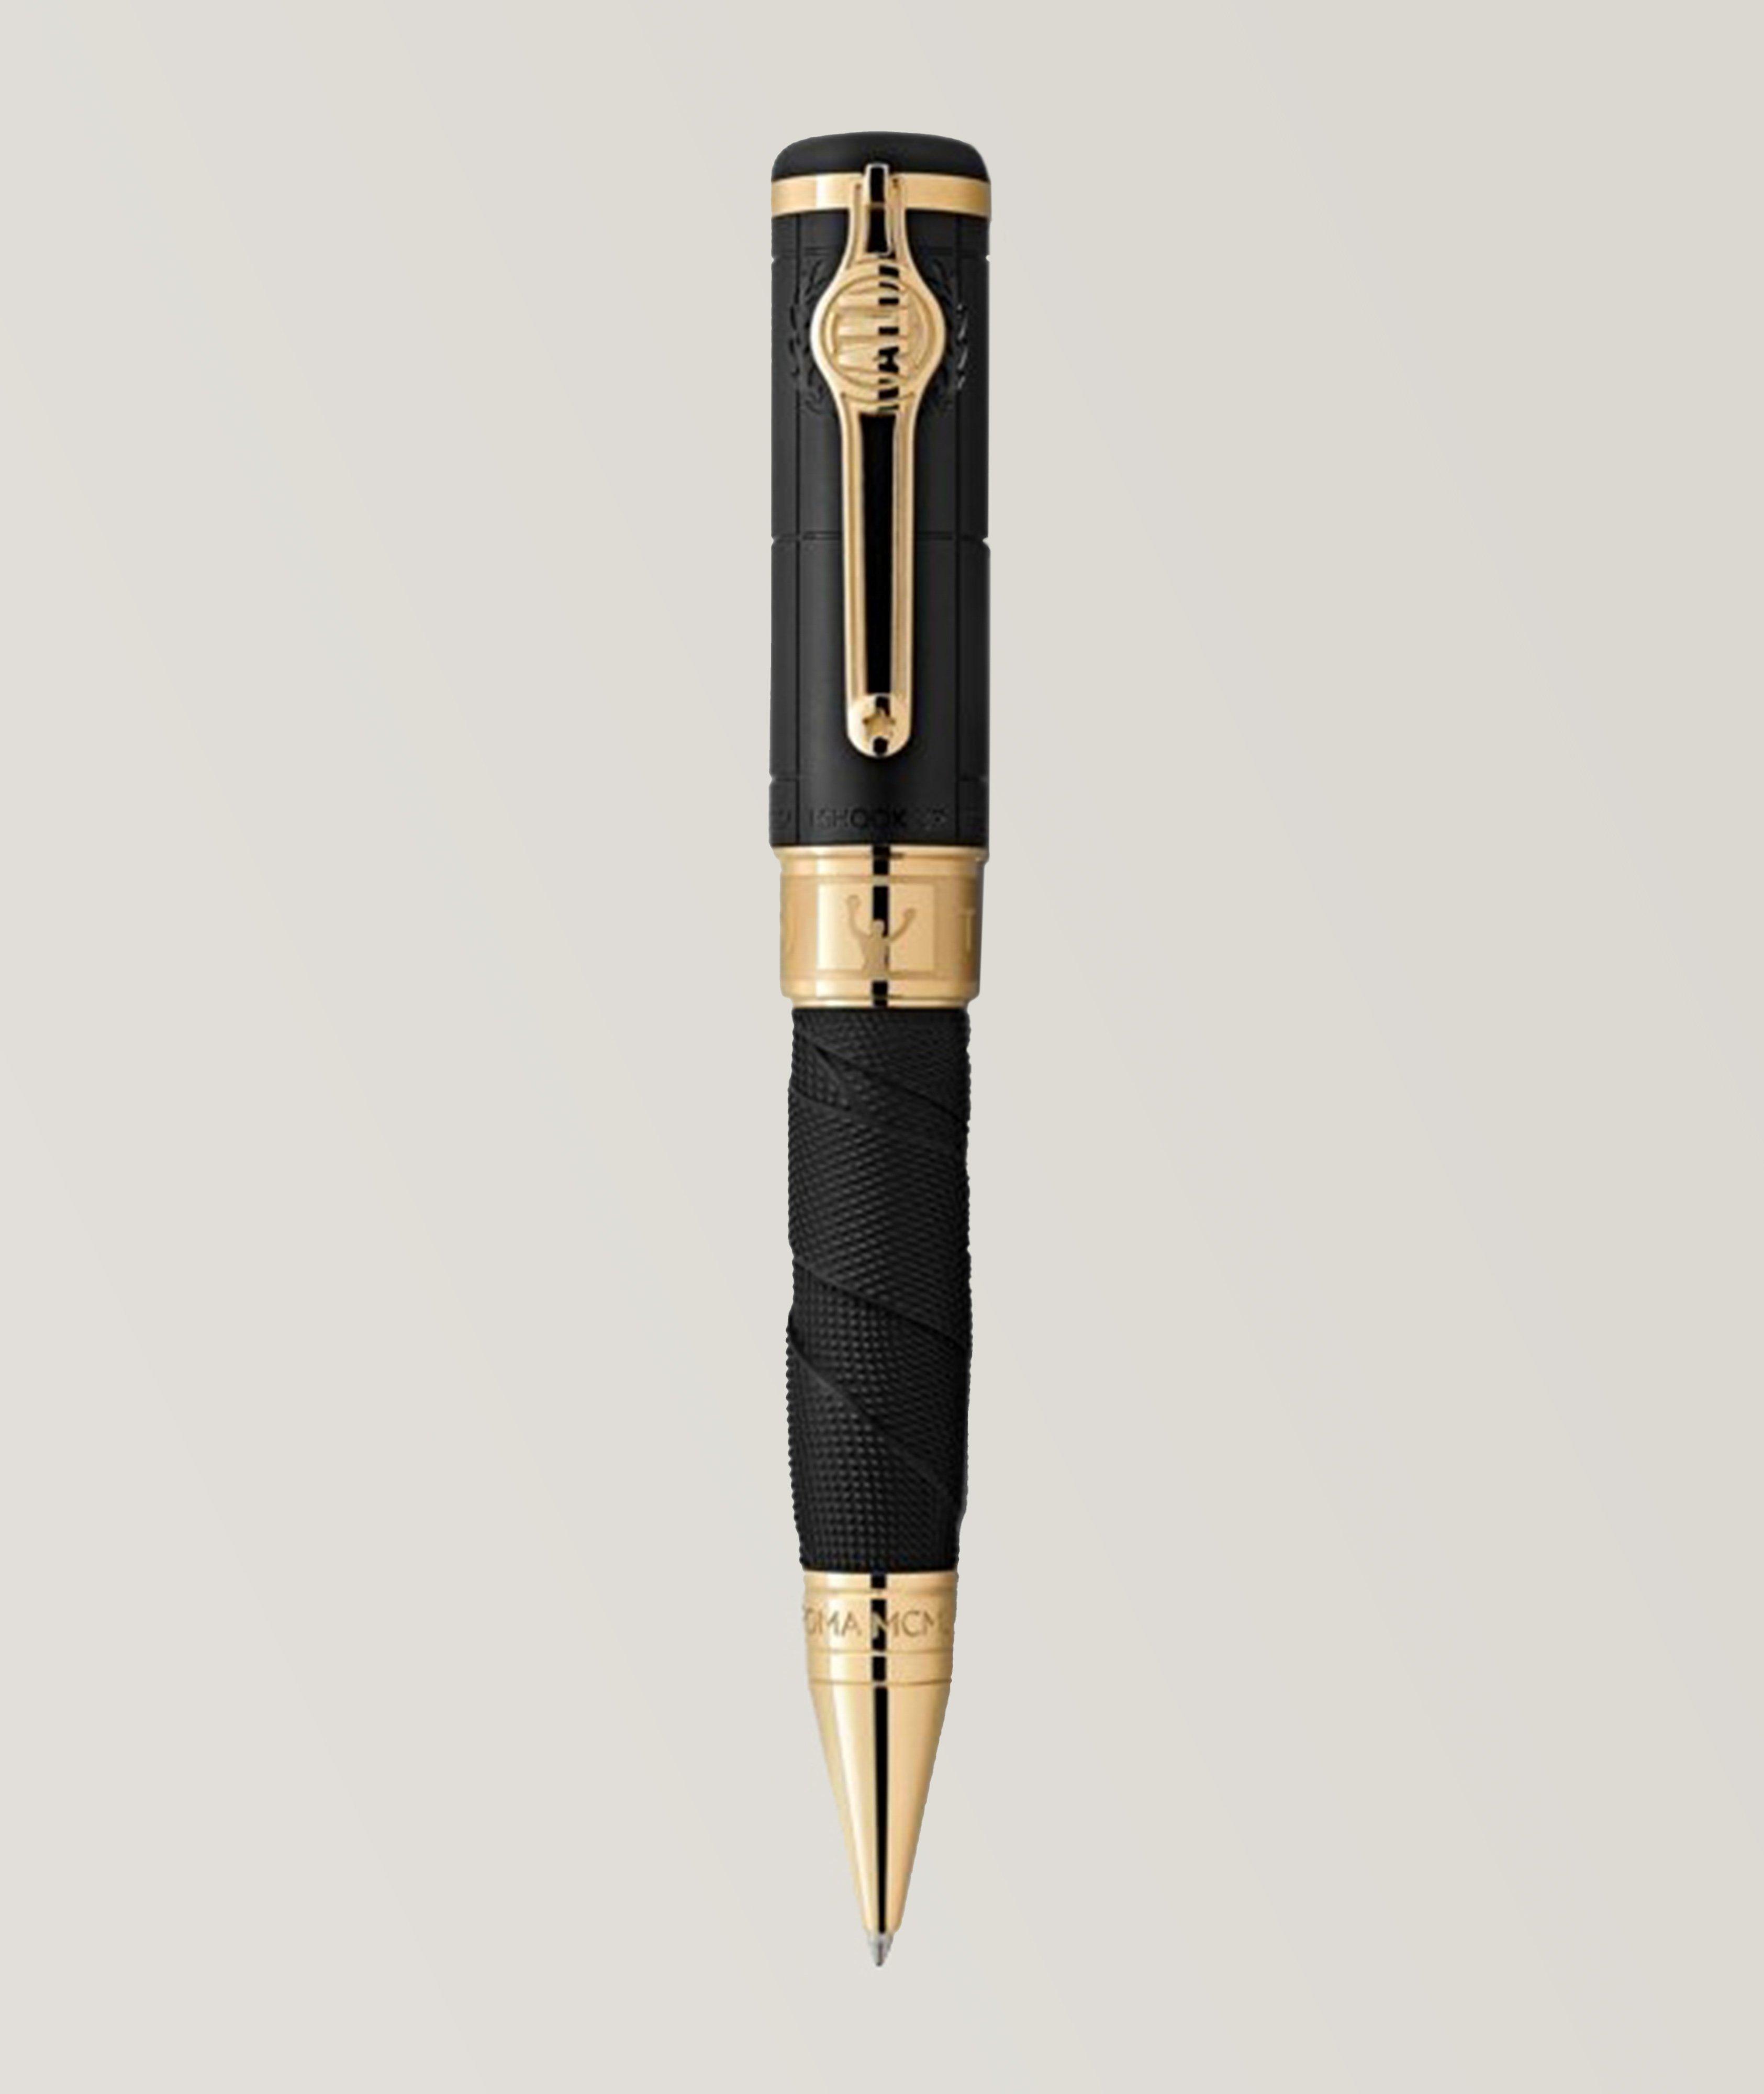 Special Edition Great Characters Muhammad Ballpoint Pen